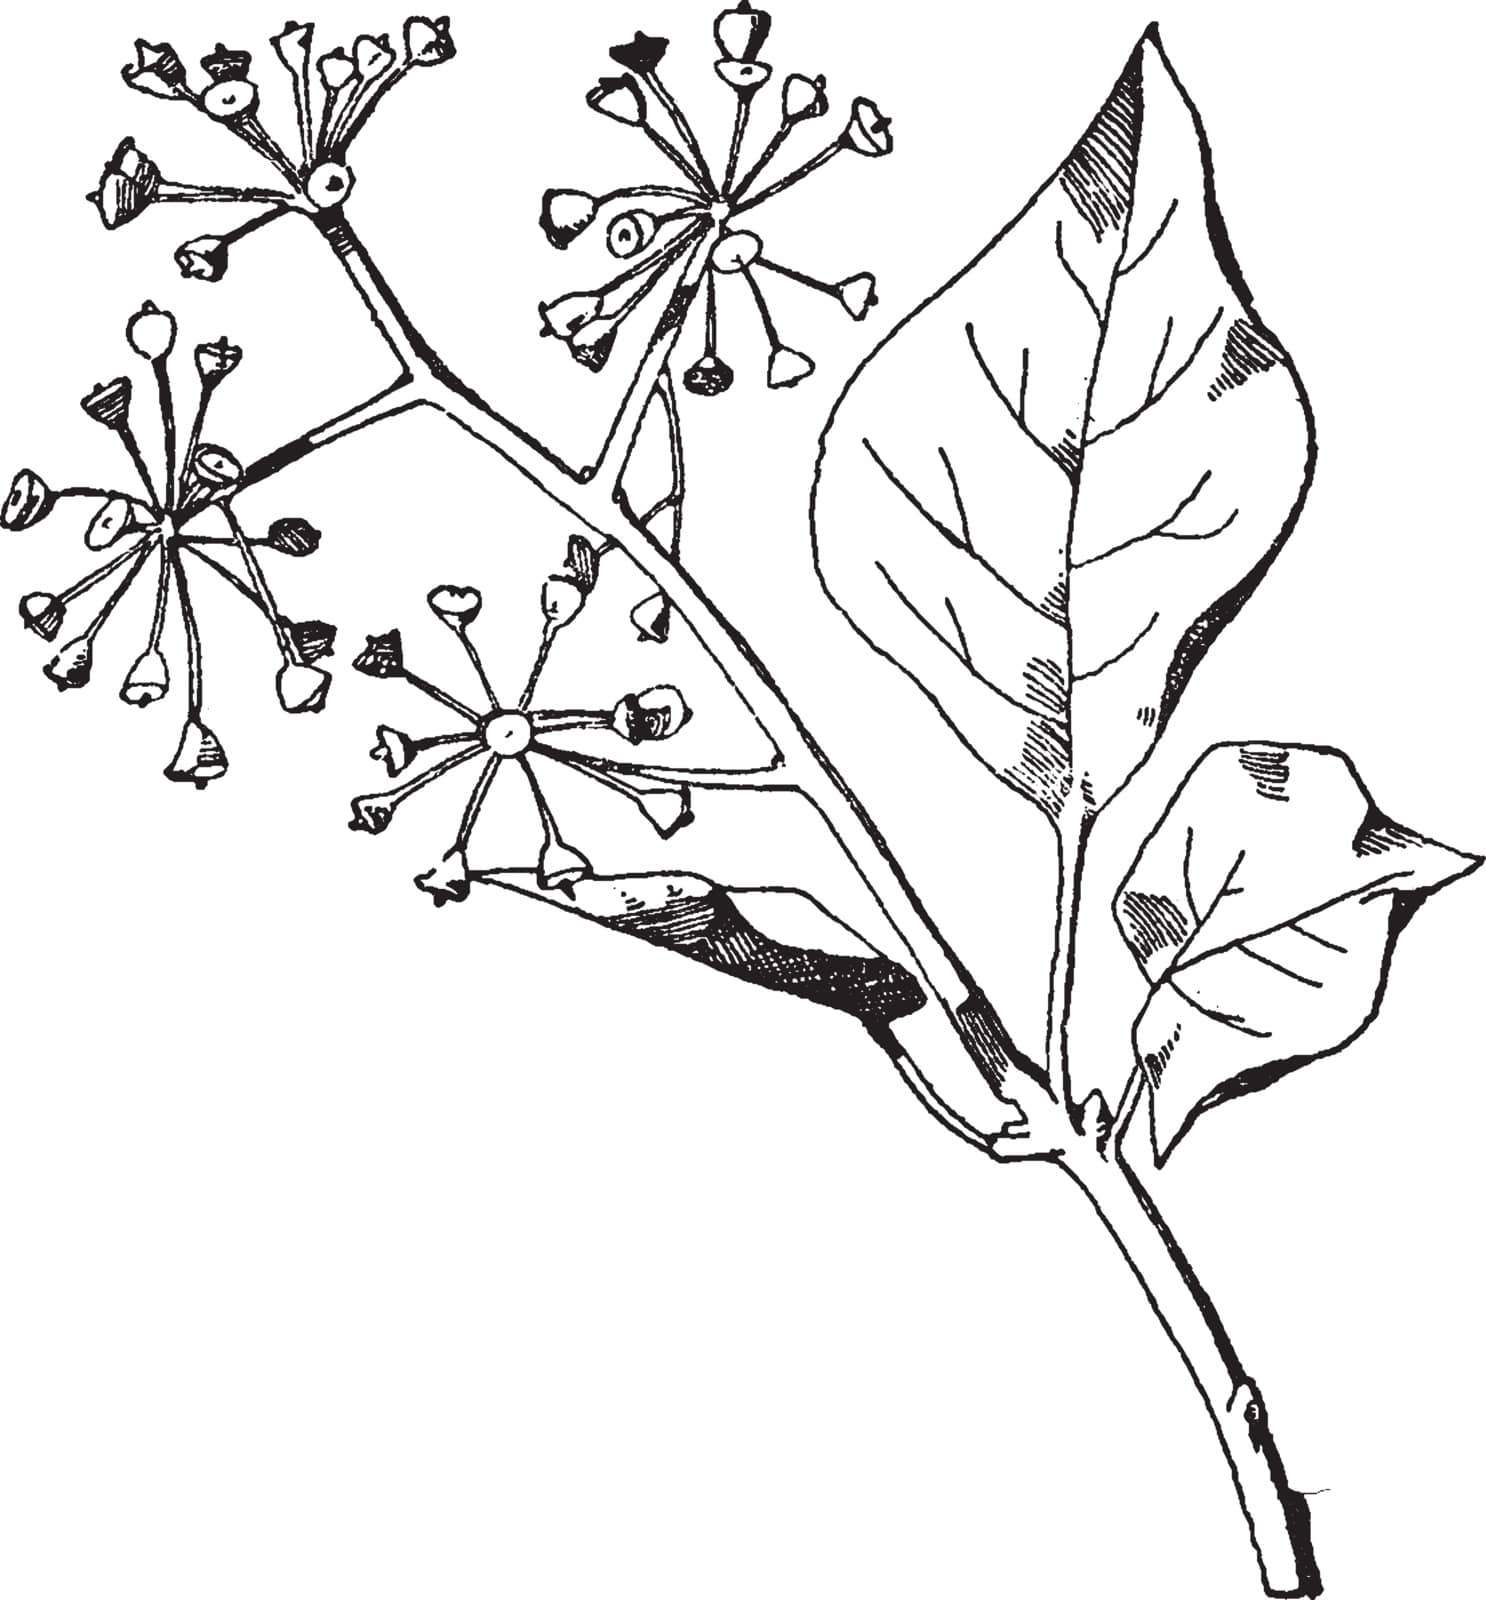 Ivy Spray has elliptic tapering leaves that are apparent after blooming, vintage line drawing or engraving illustration.